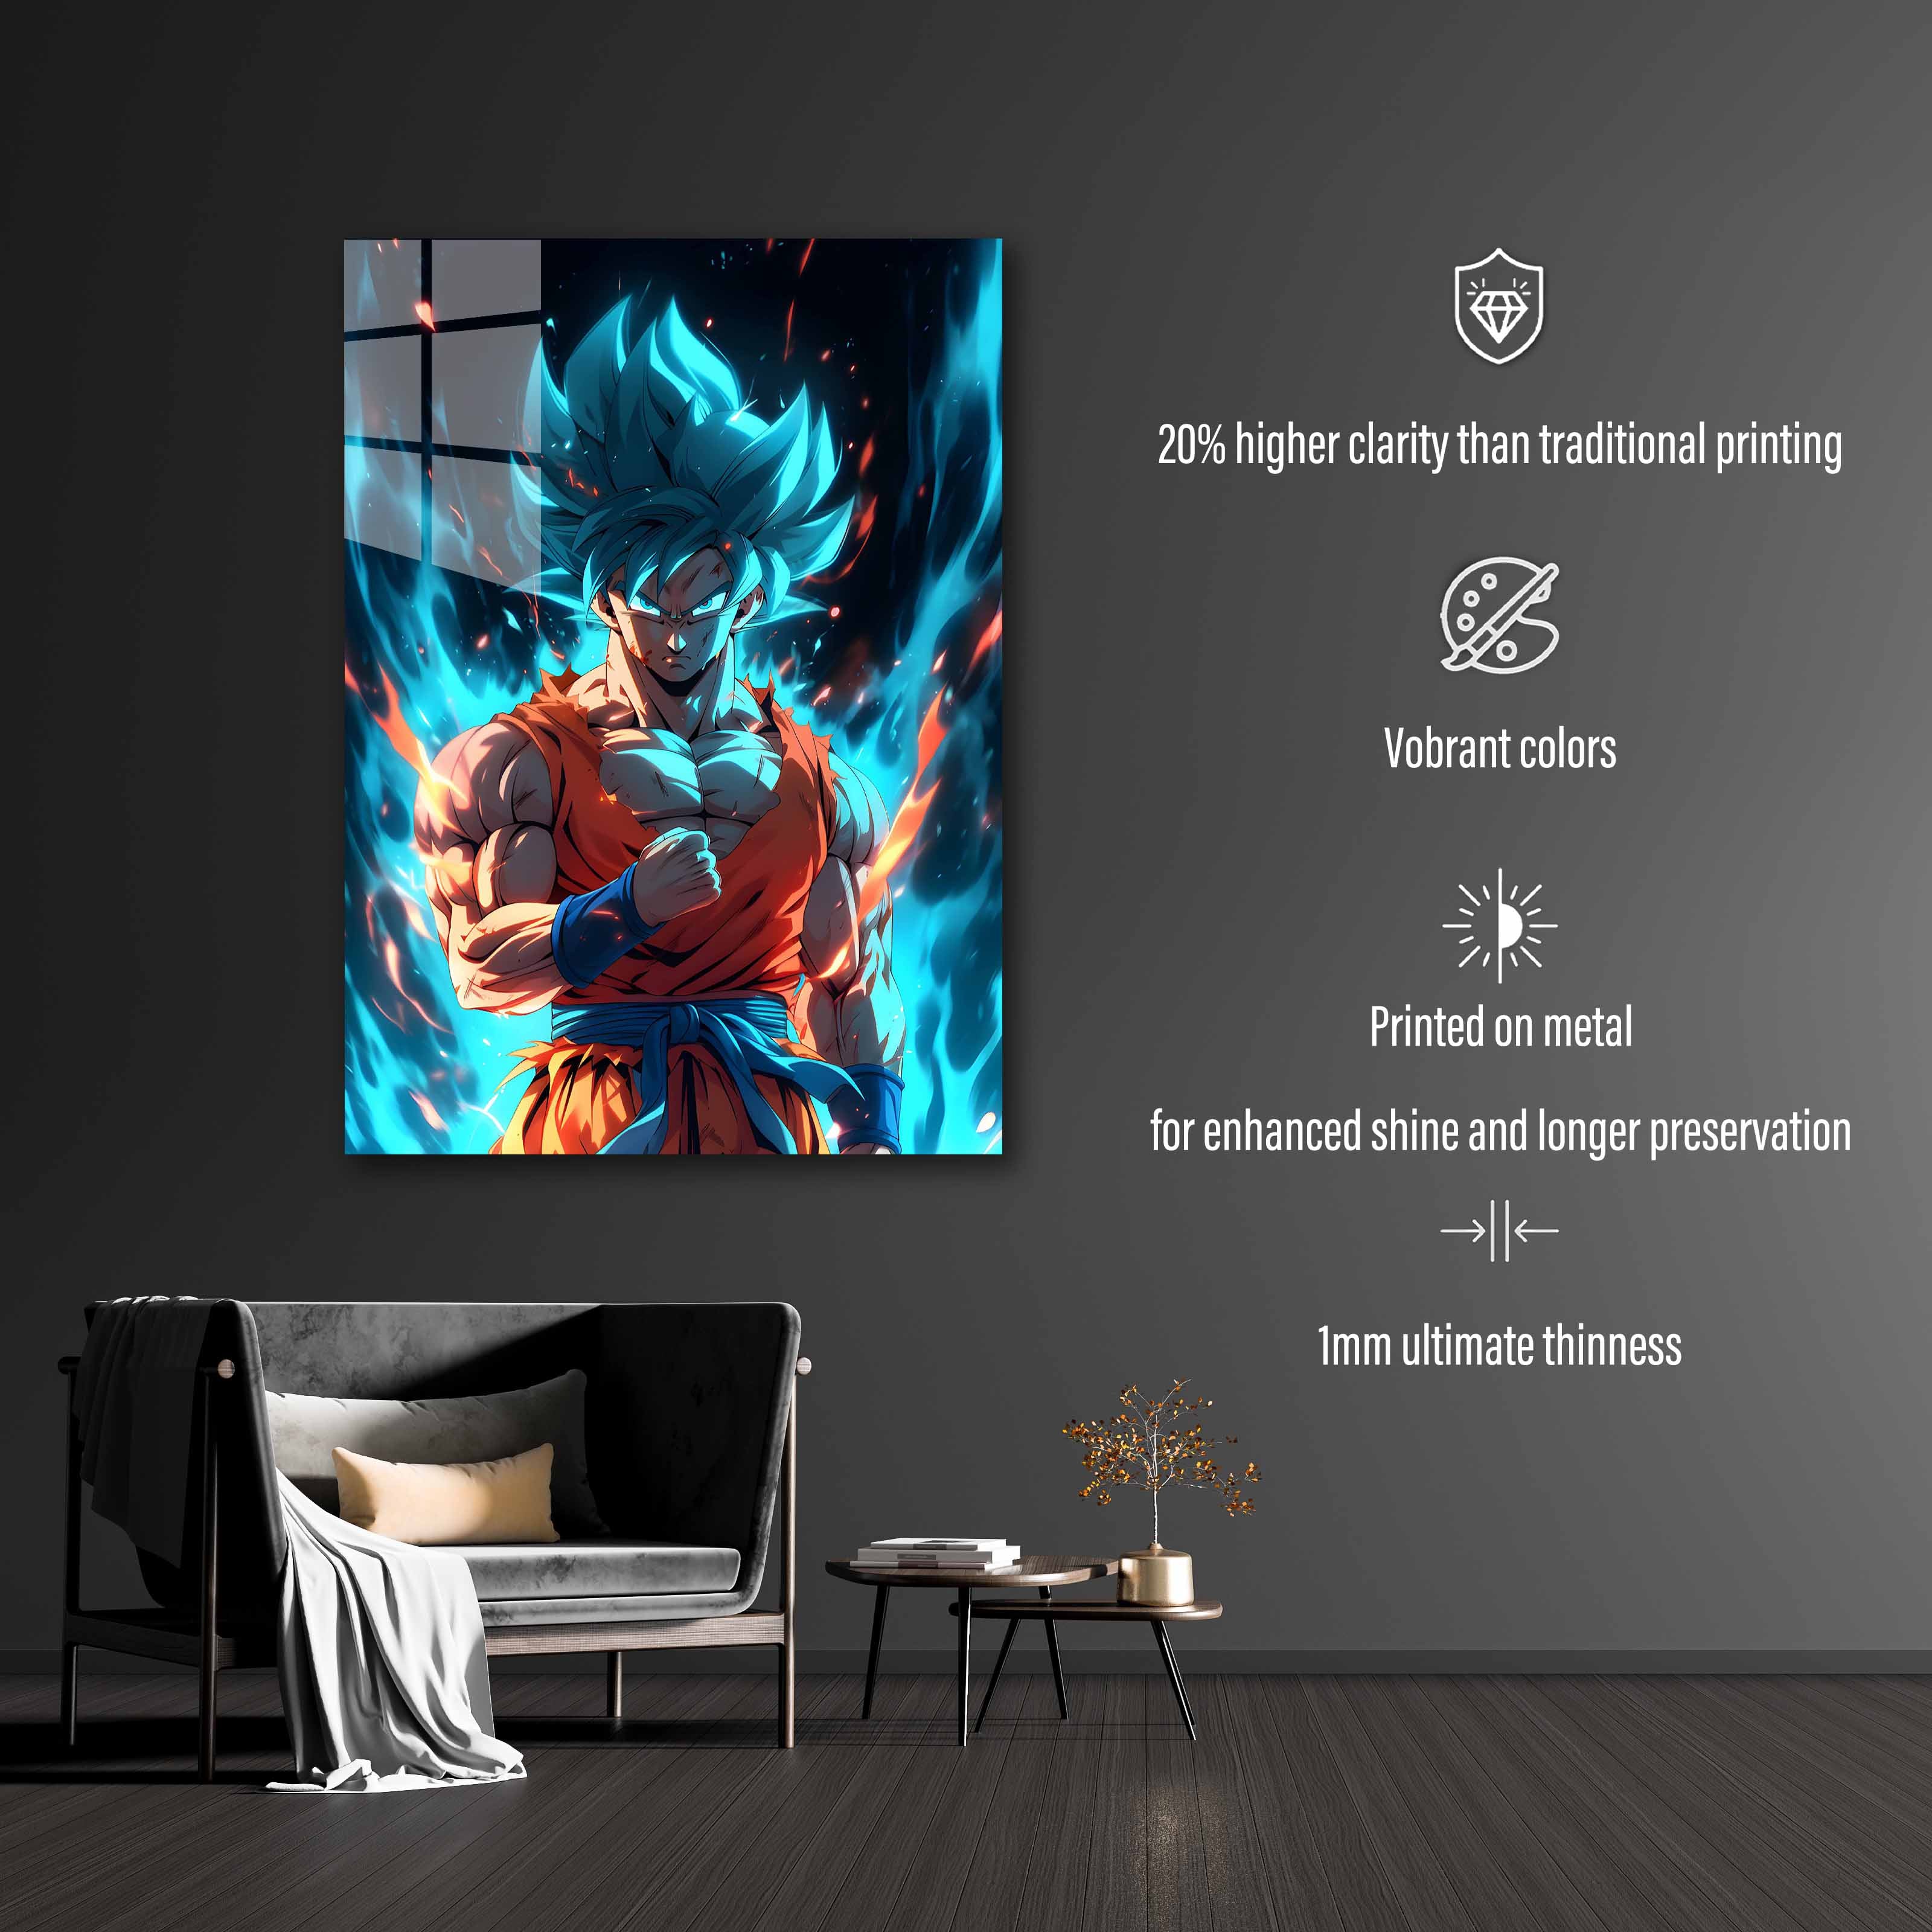 Son goku from DBZ-designed by @Vid_M@tion